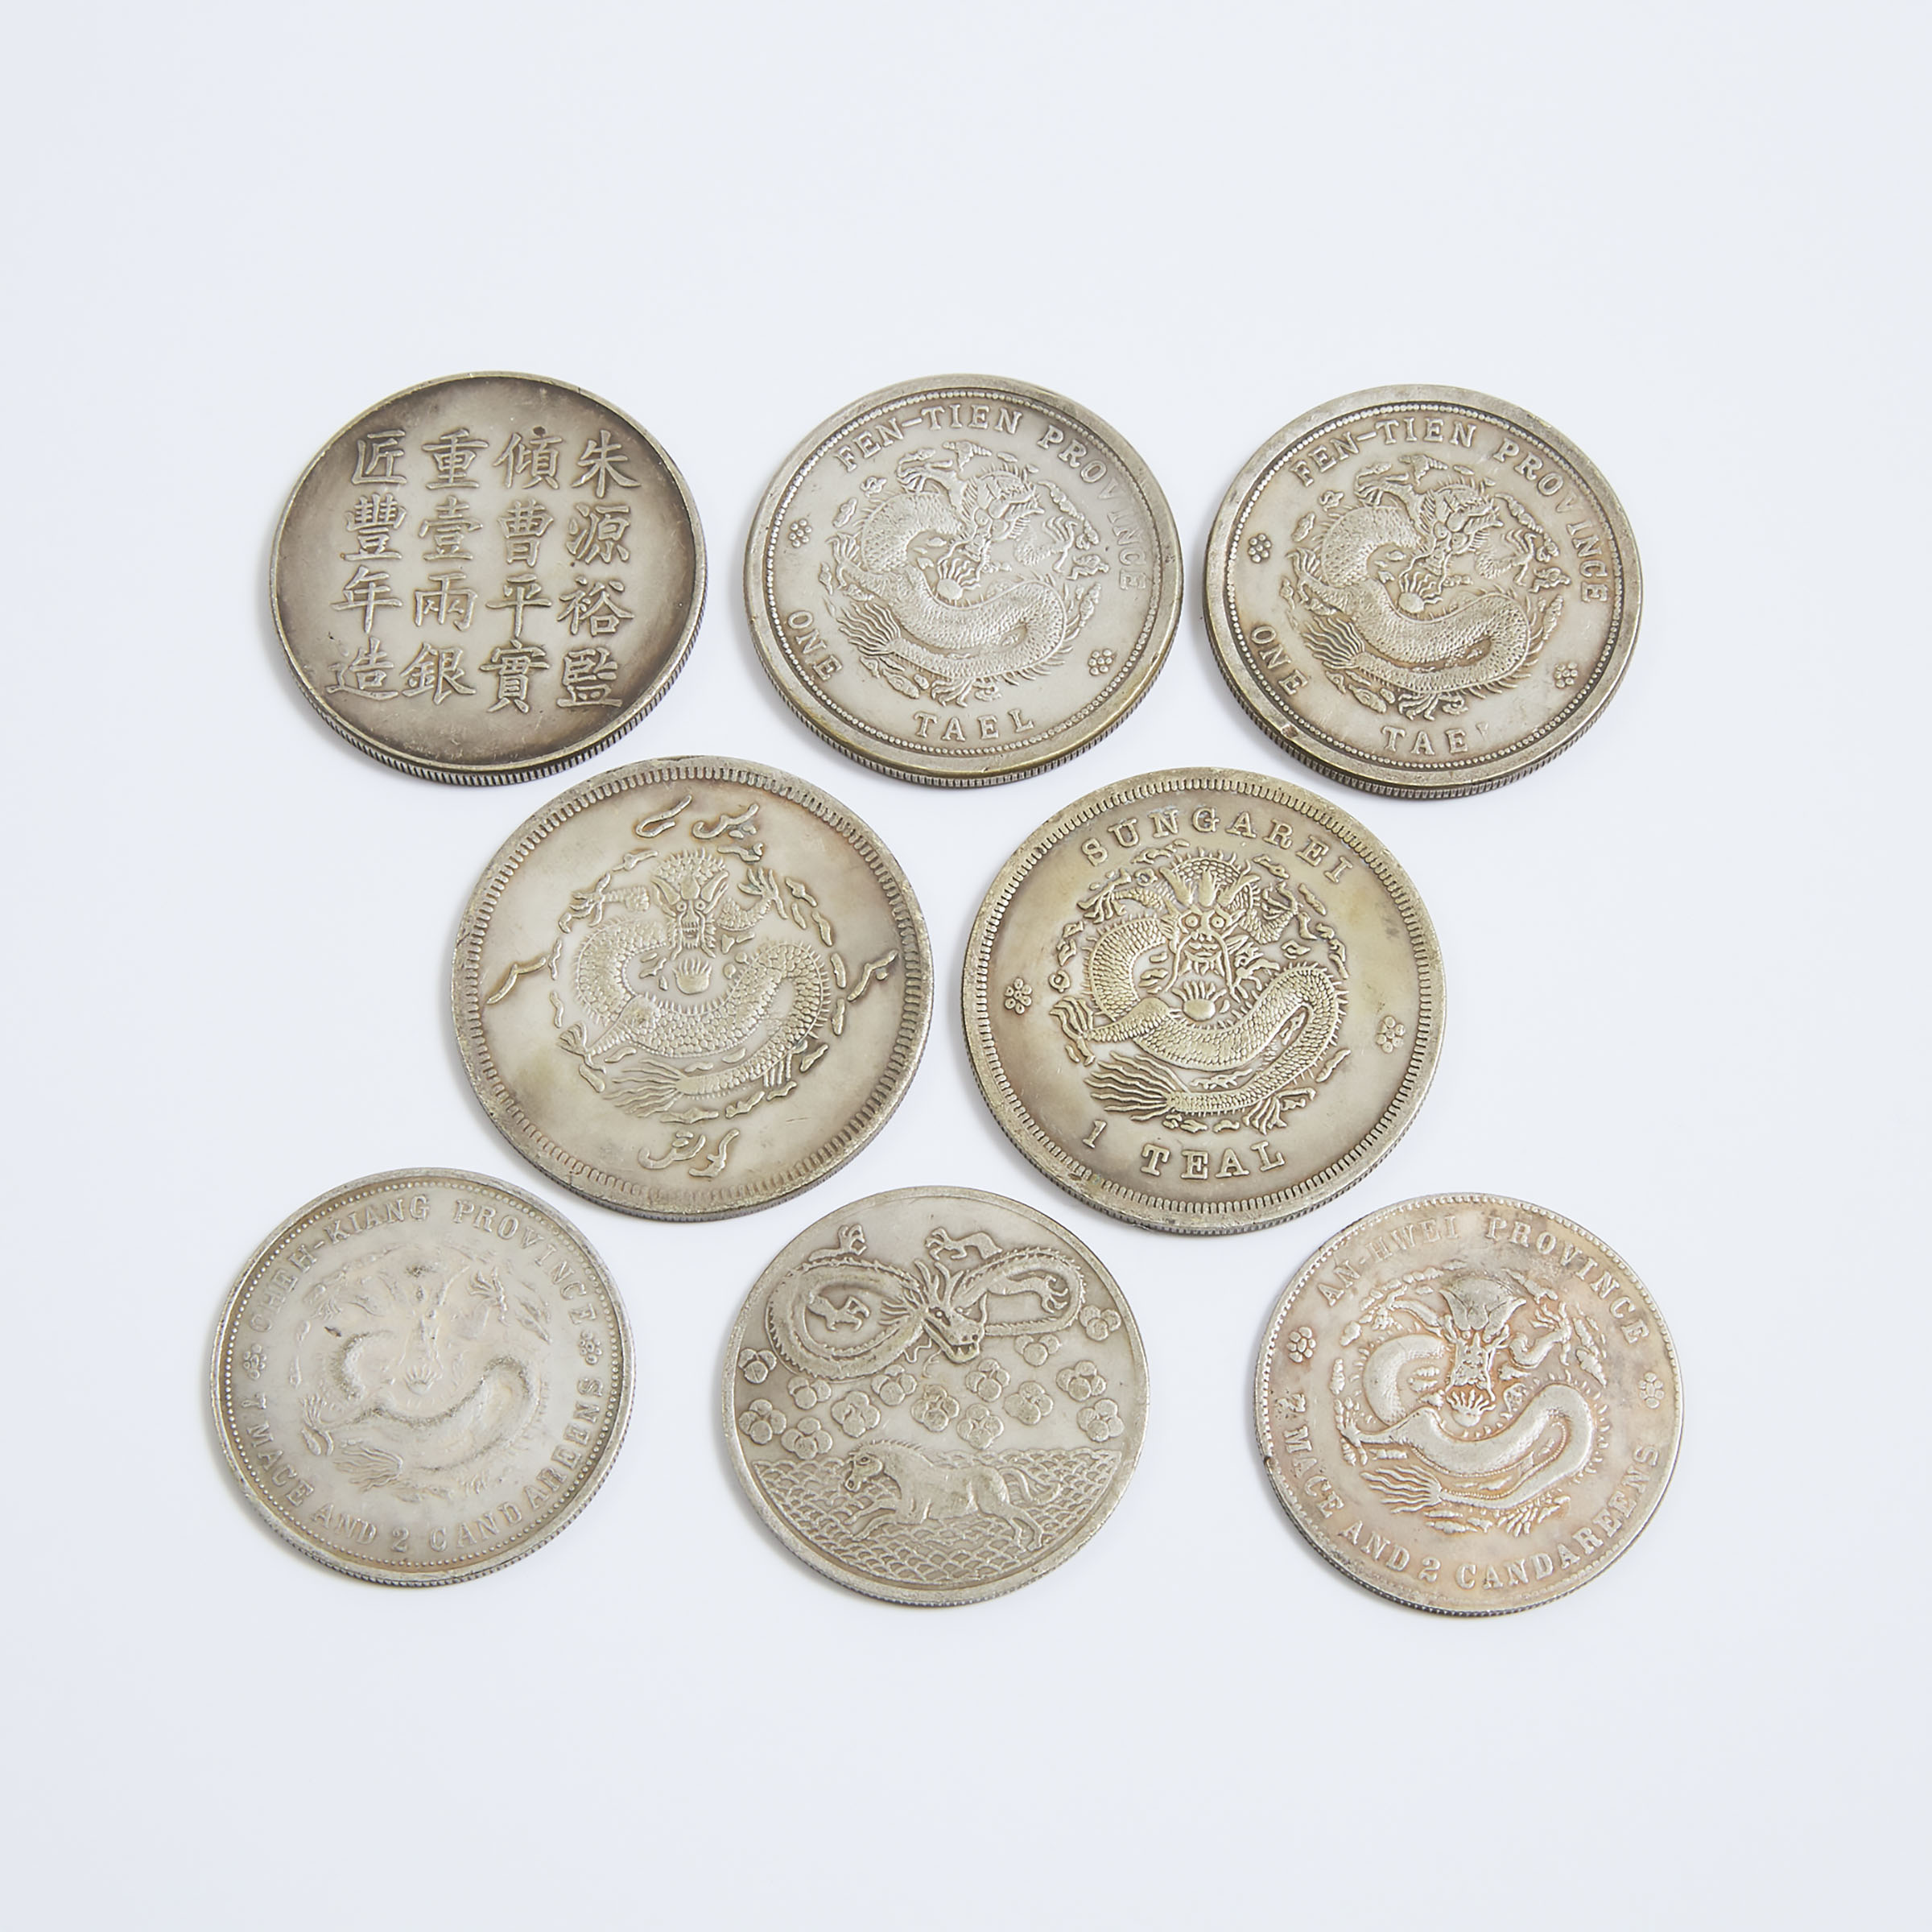 Eight Chinese Silver Coins With